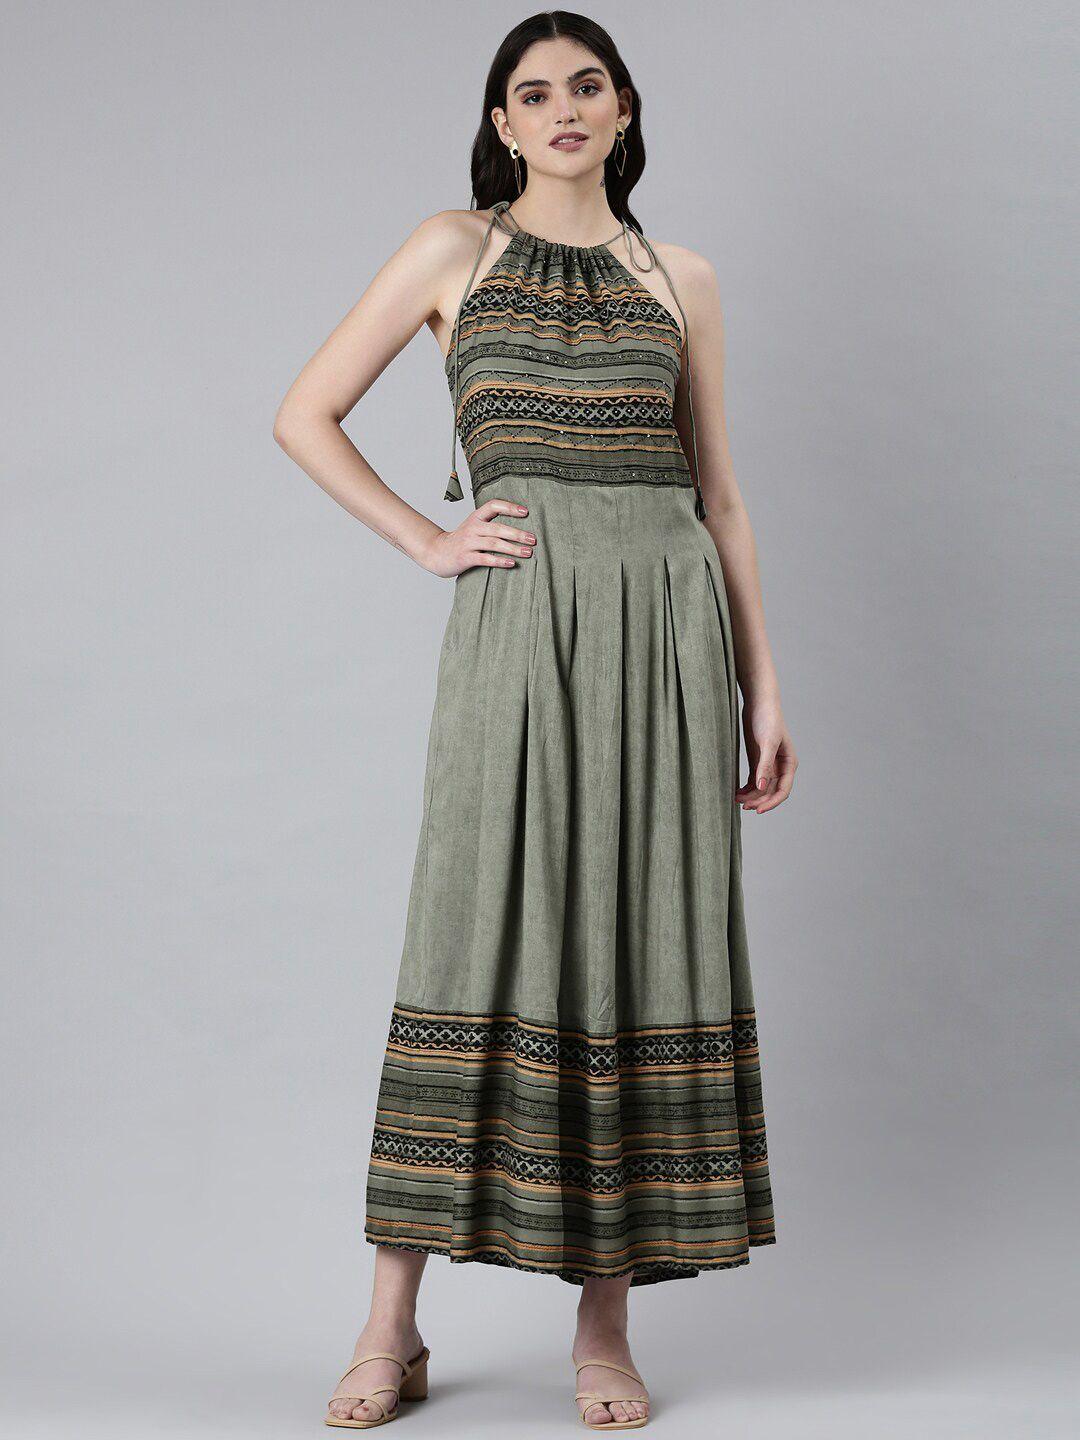 showoff tribal printed halter neck pleated cotton a-line dress